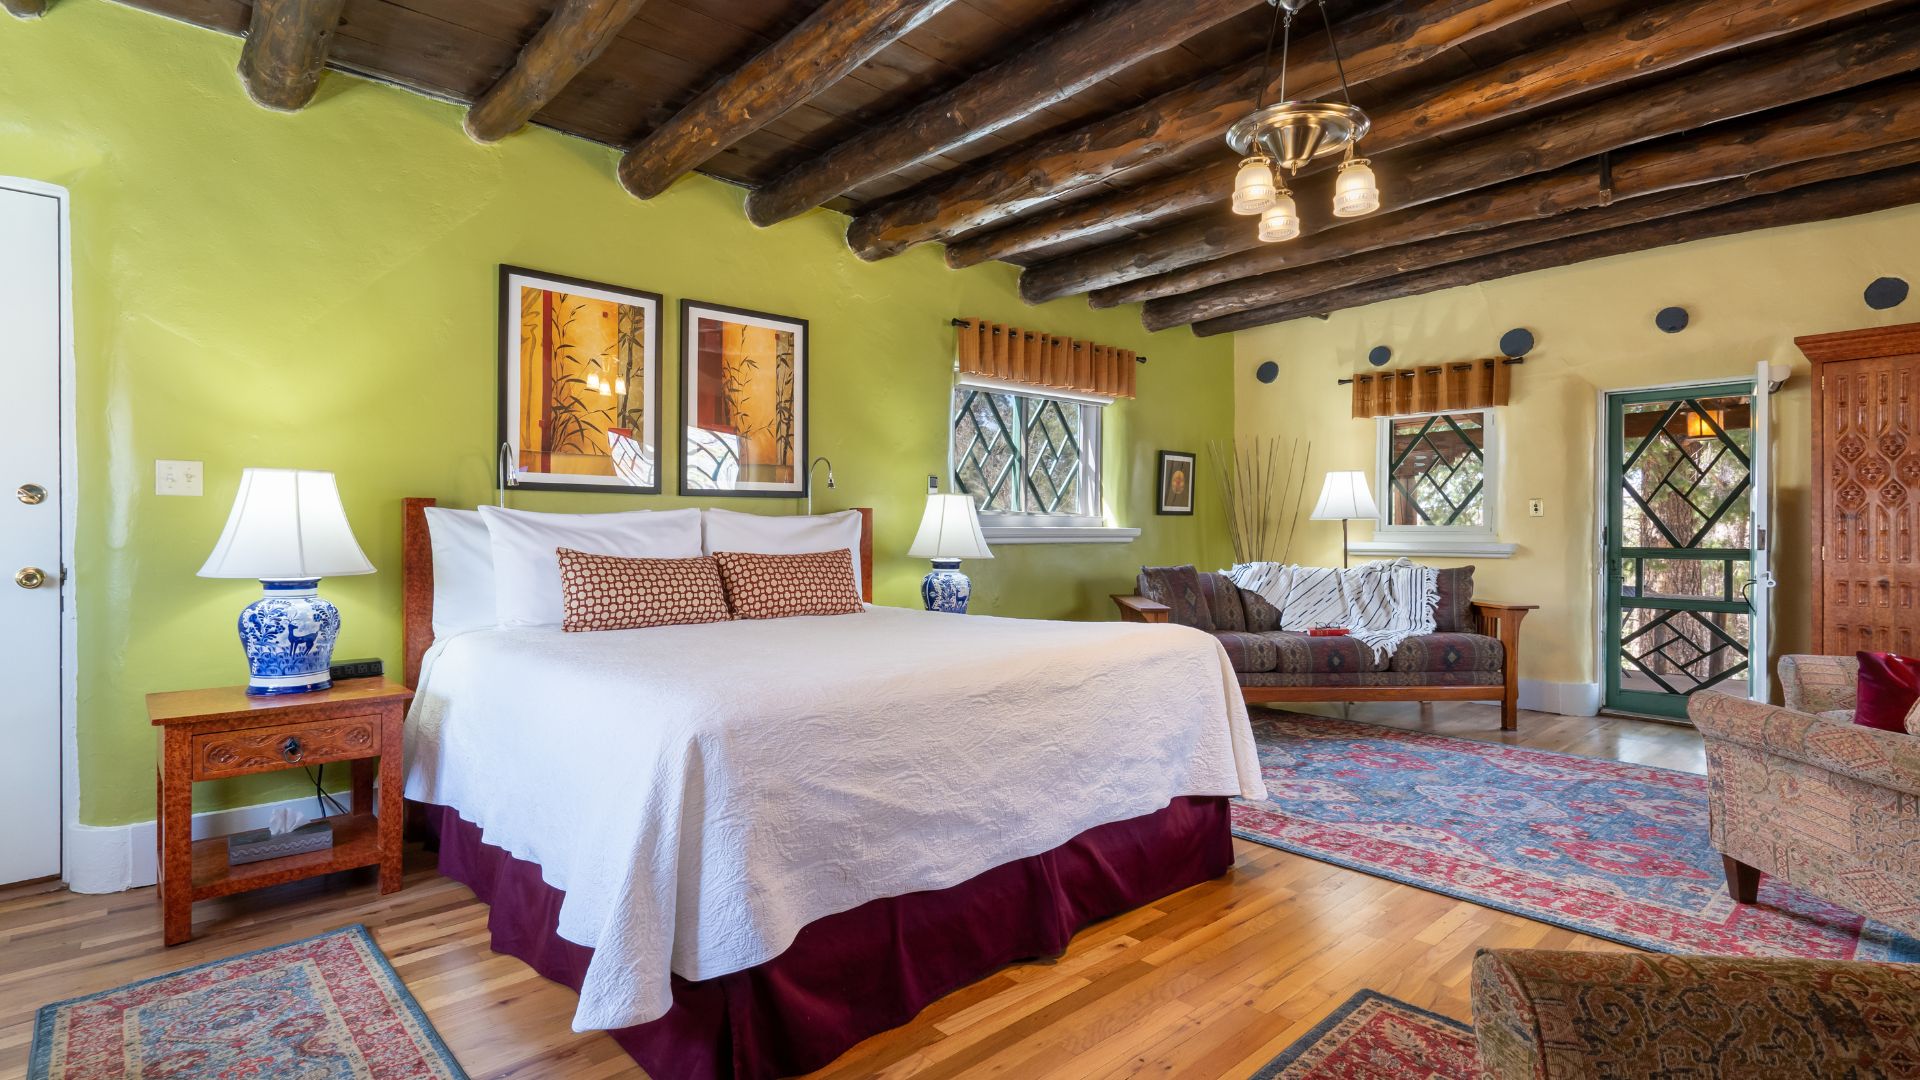 Spacious bright light green guest rooms with exposed beams, wood floors and king bed.